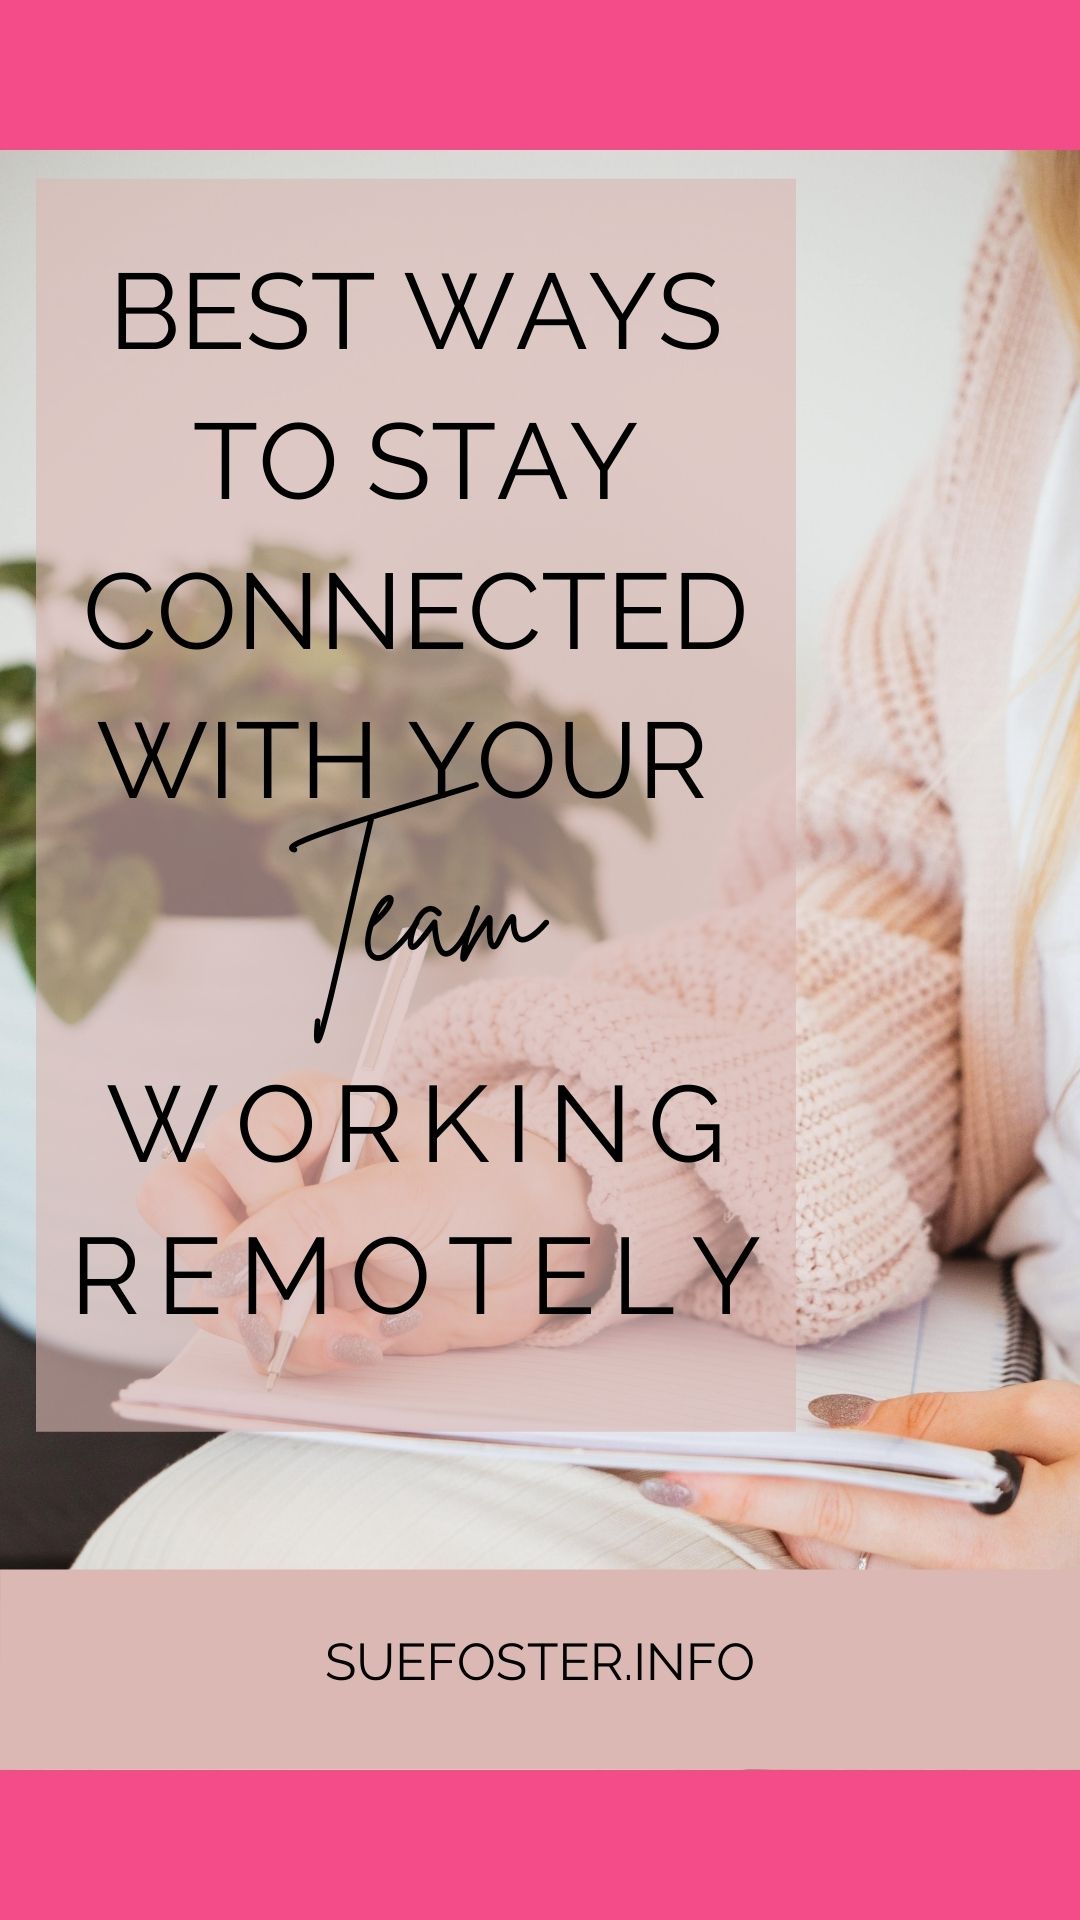 By following these tips, however, you can be sure that you will be able to effectively collaborate with your team and stay connected even when you are not in the same physical location.